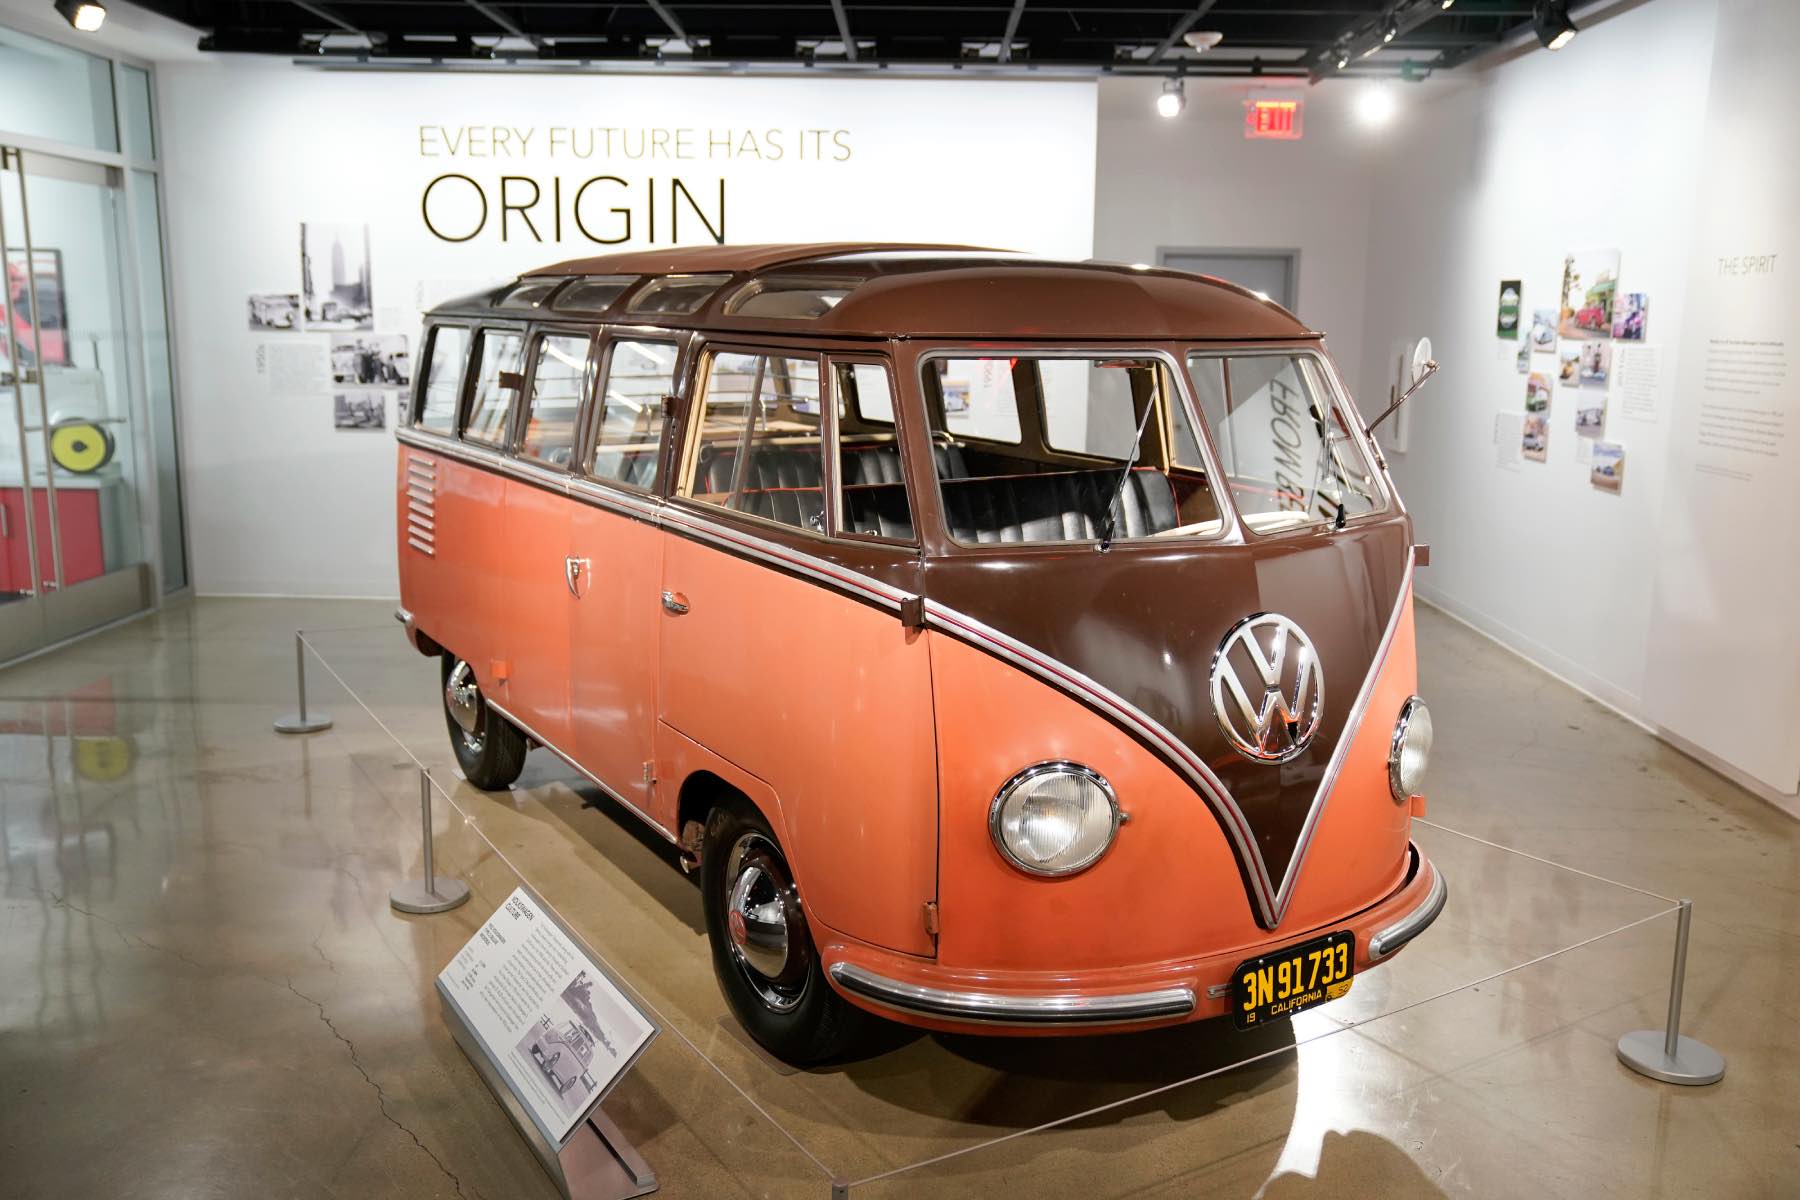 A vintage VW Bus on display at an event.